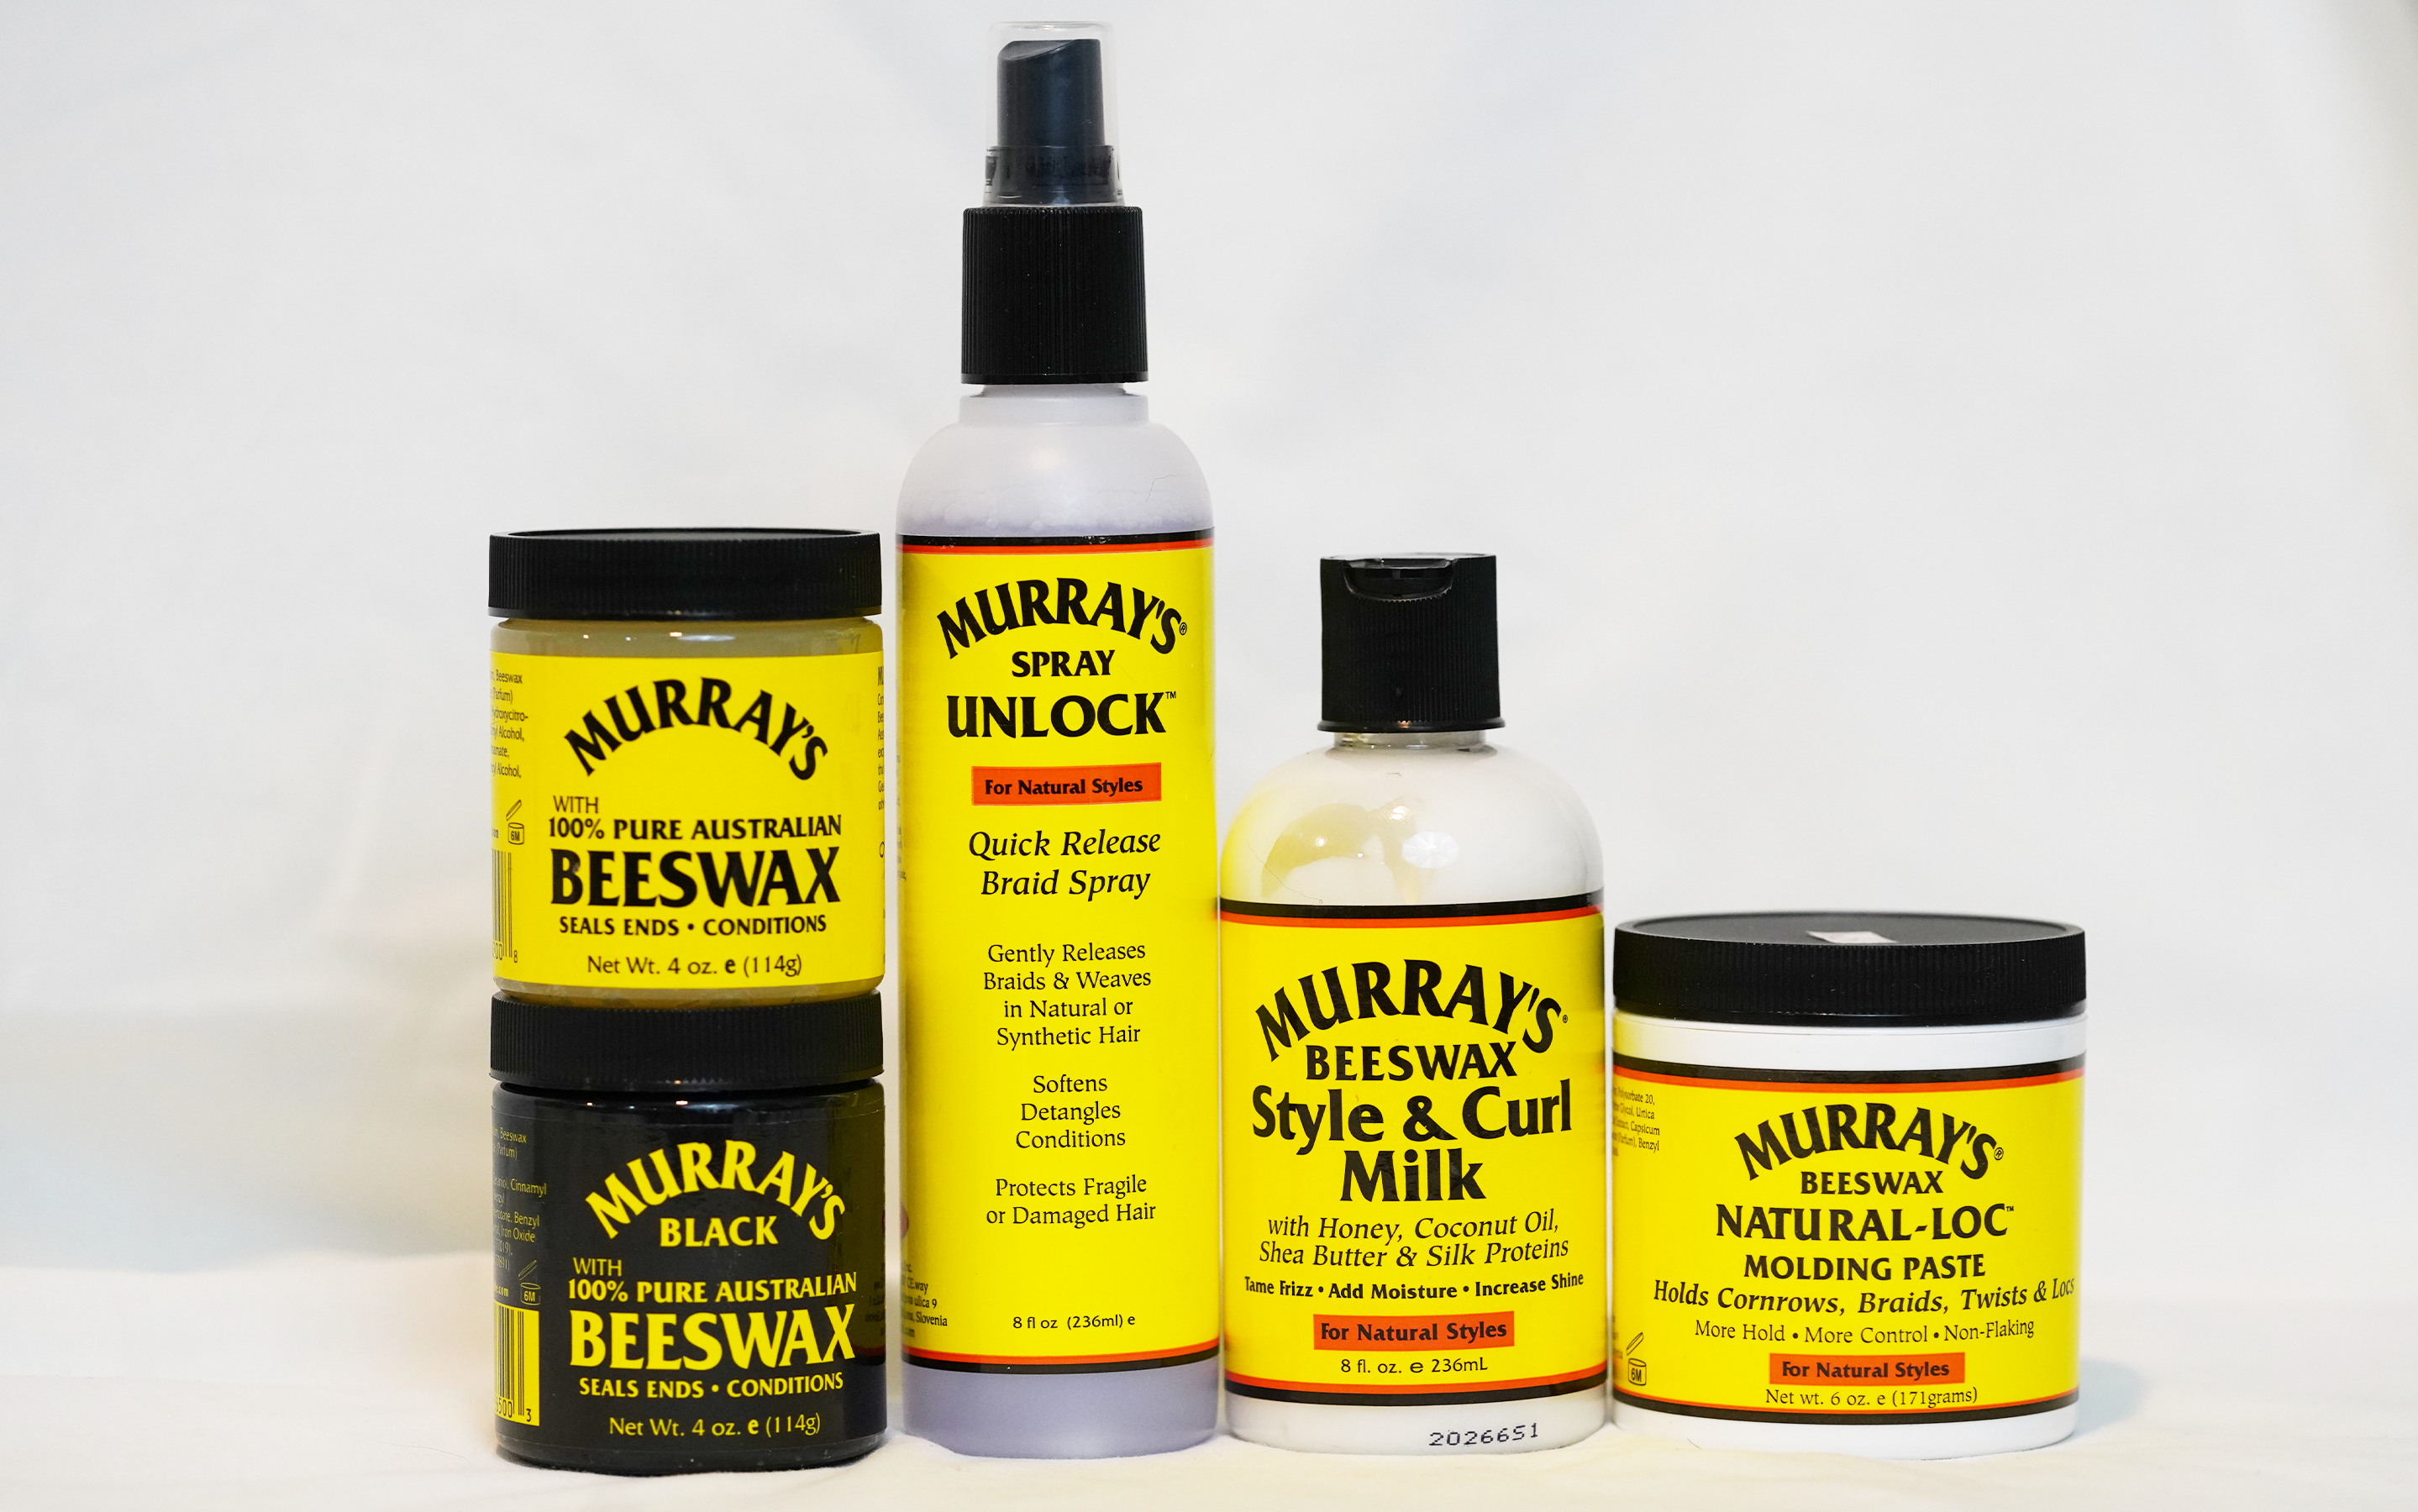 Murray's Black Beeswax – One Stop Beauty Supply